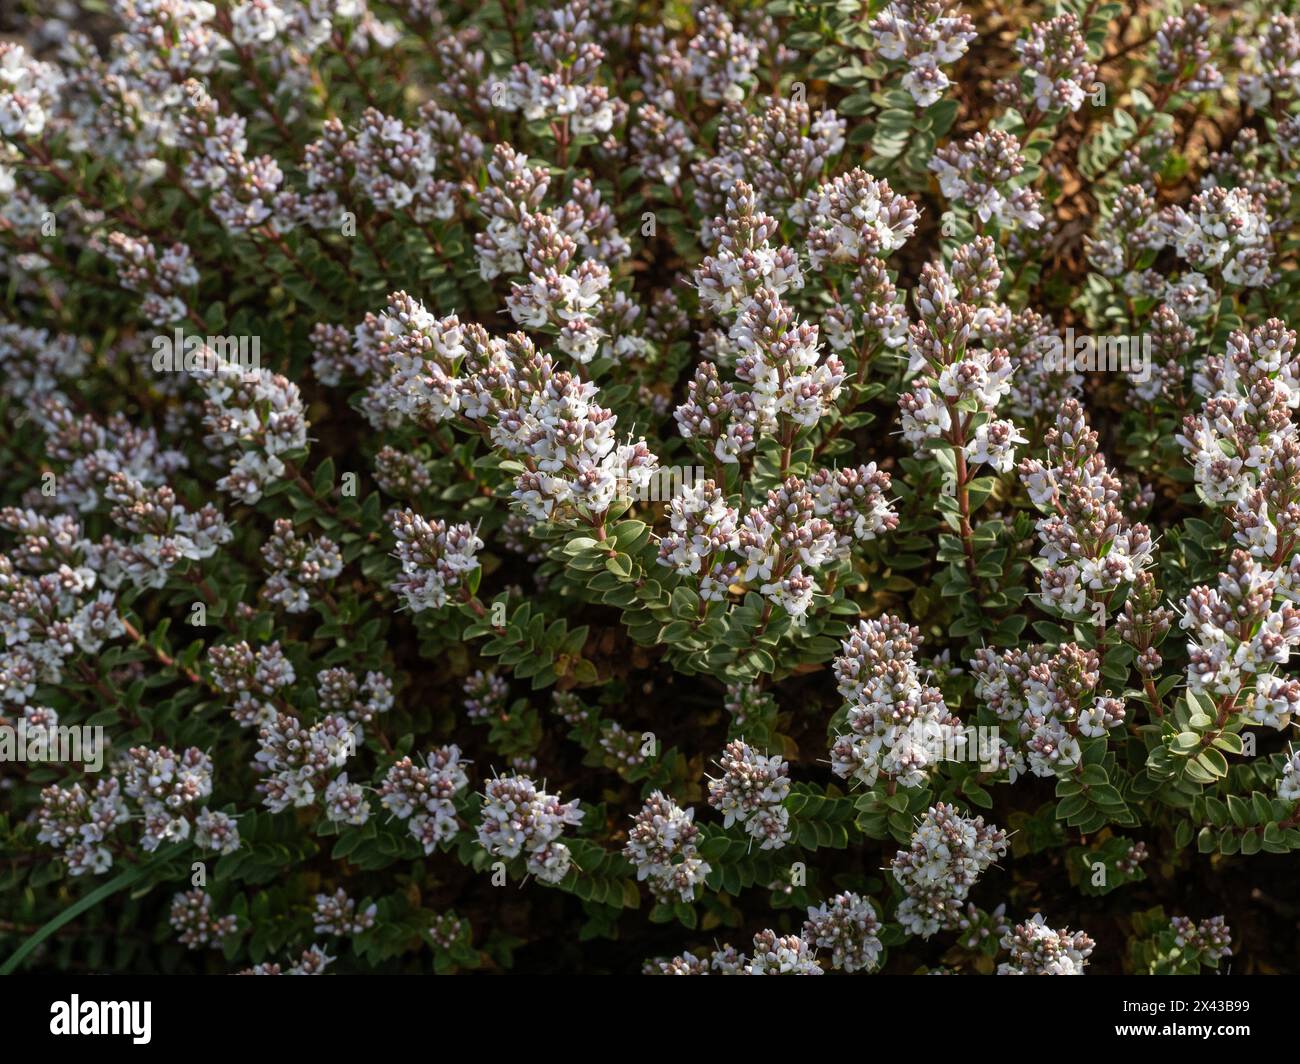 The dwarf hebe Hebe 'Baby' covered in small delicate very pale pink flowers Stock Photo